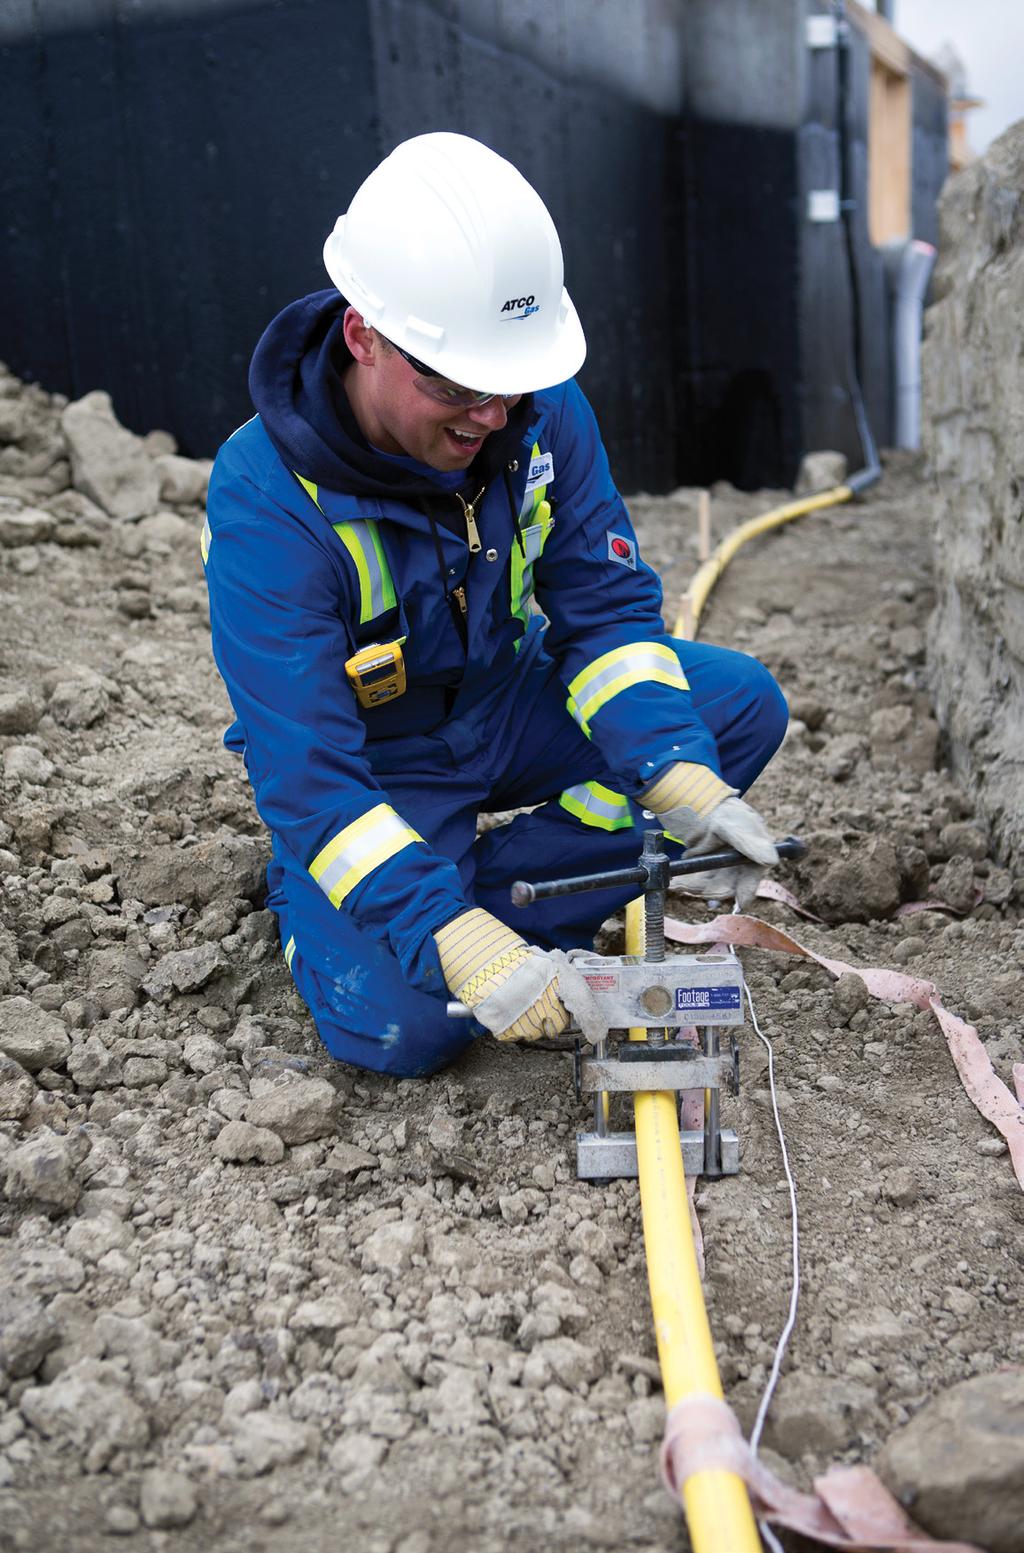 ATCO GAS IS ON CALL 24-HOURS A DAY, EVERY DAY OF THE YEAR RESPONDING IMMEDIATELY TO CALLS AND EMERGENCIES INVOLVING: Natural gas odour (rotten egg odour). Hit or ruptured natural gas lines.